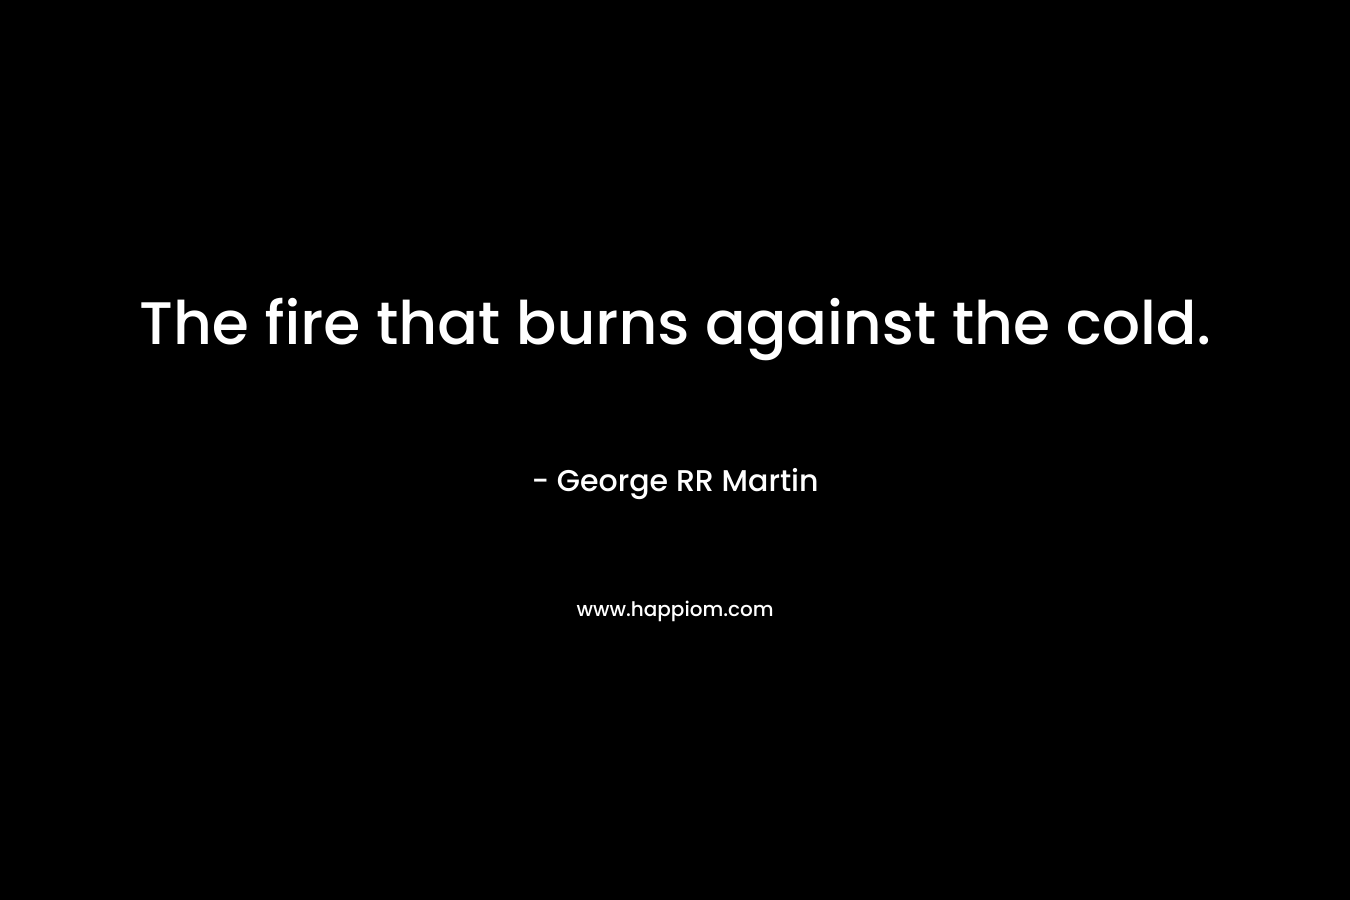 The fire that burns against the cold. – George RR Martin